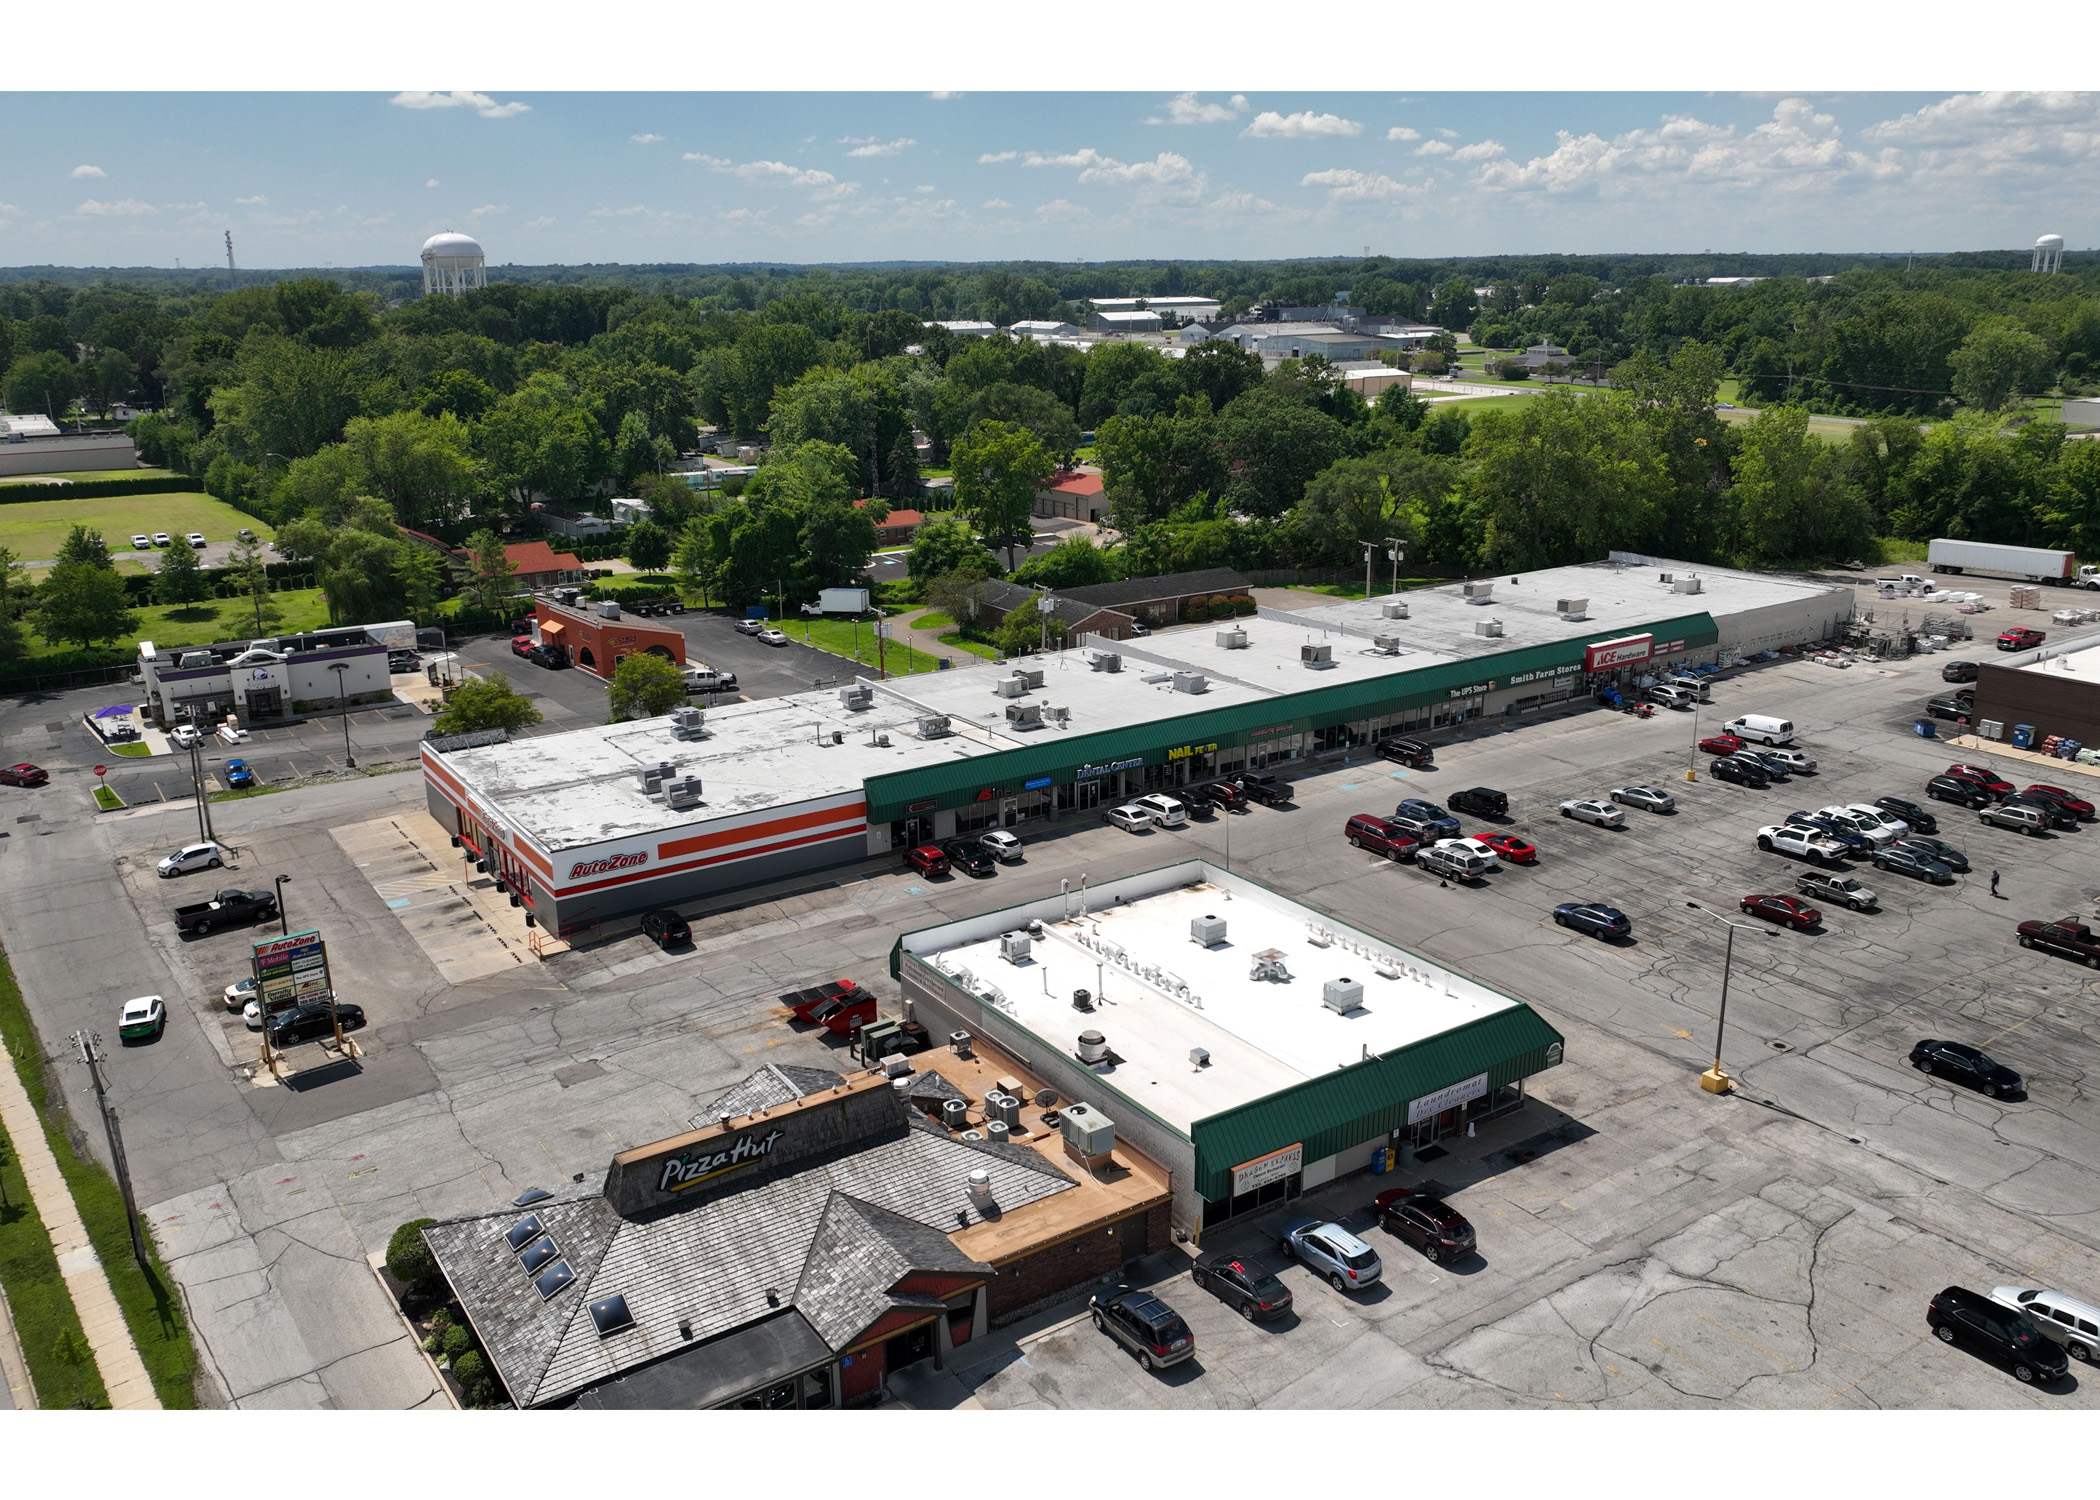 Plymouth Plaza Pizza Hut, Auto Zone, ASine, Dental Center, Nail Fever, UPS Store, Smith Farm Stores, Ace Hardware, Pizza Hut, Dragon Express and Laundry Mat Dry Cleaners parking lot, aerial view.